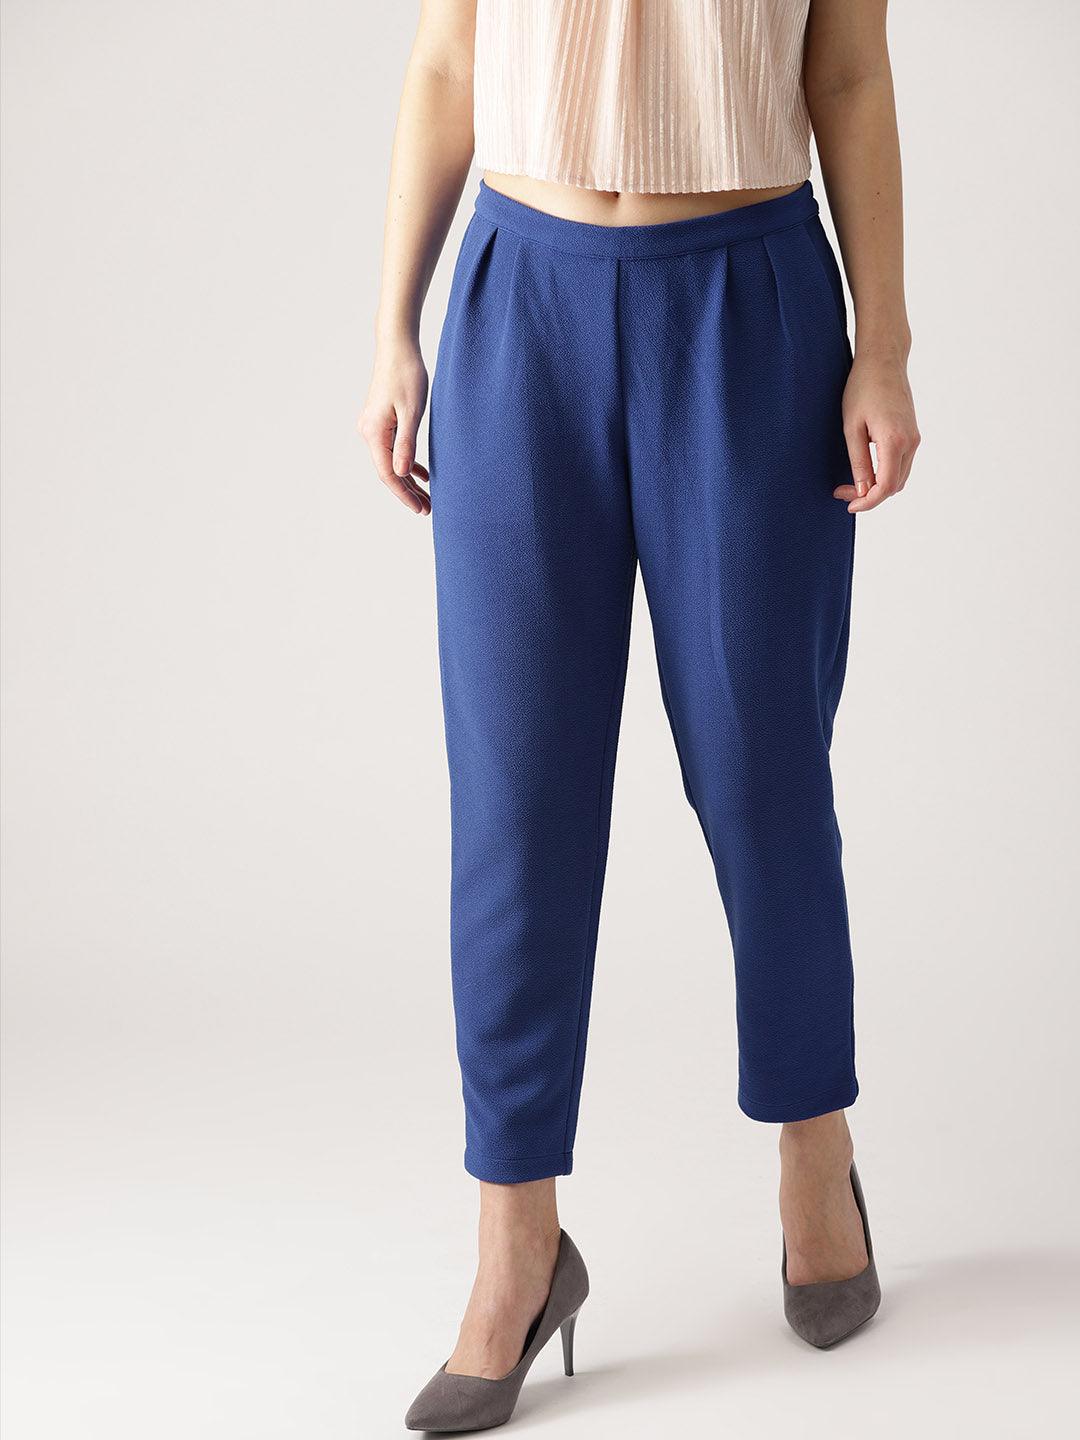 Blue Solid Polyester Trousers